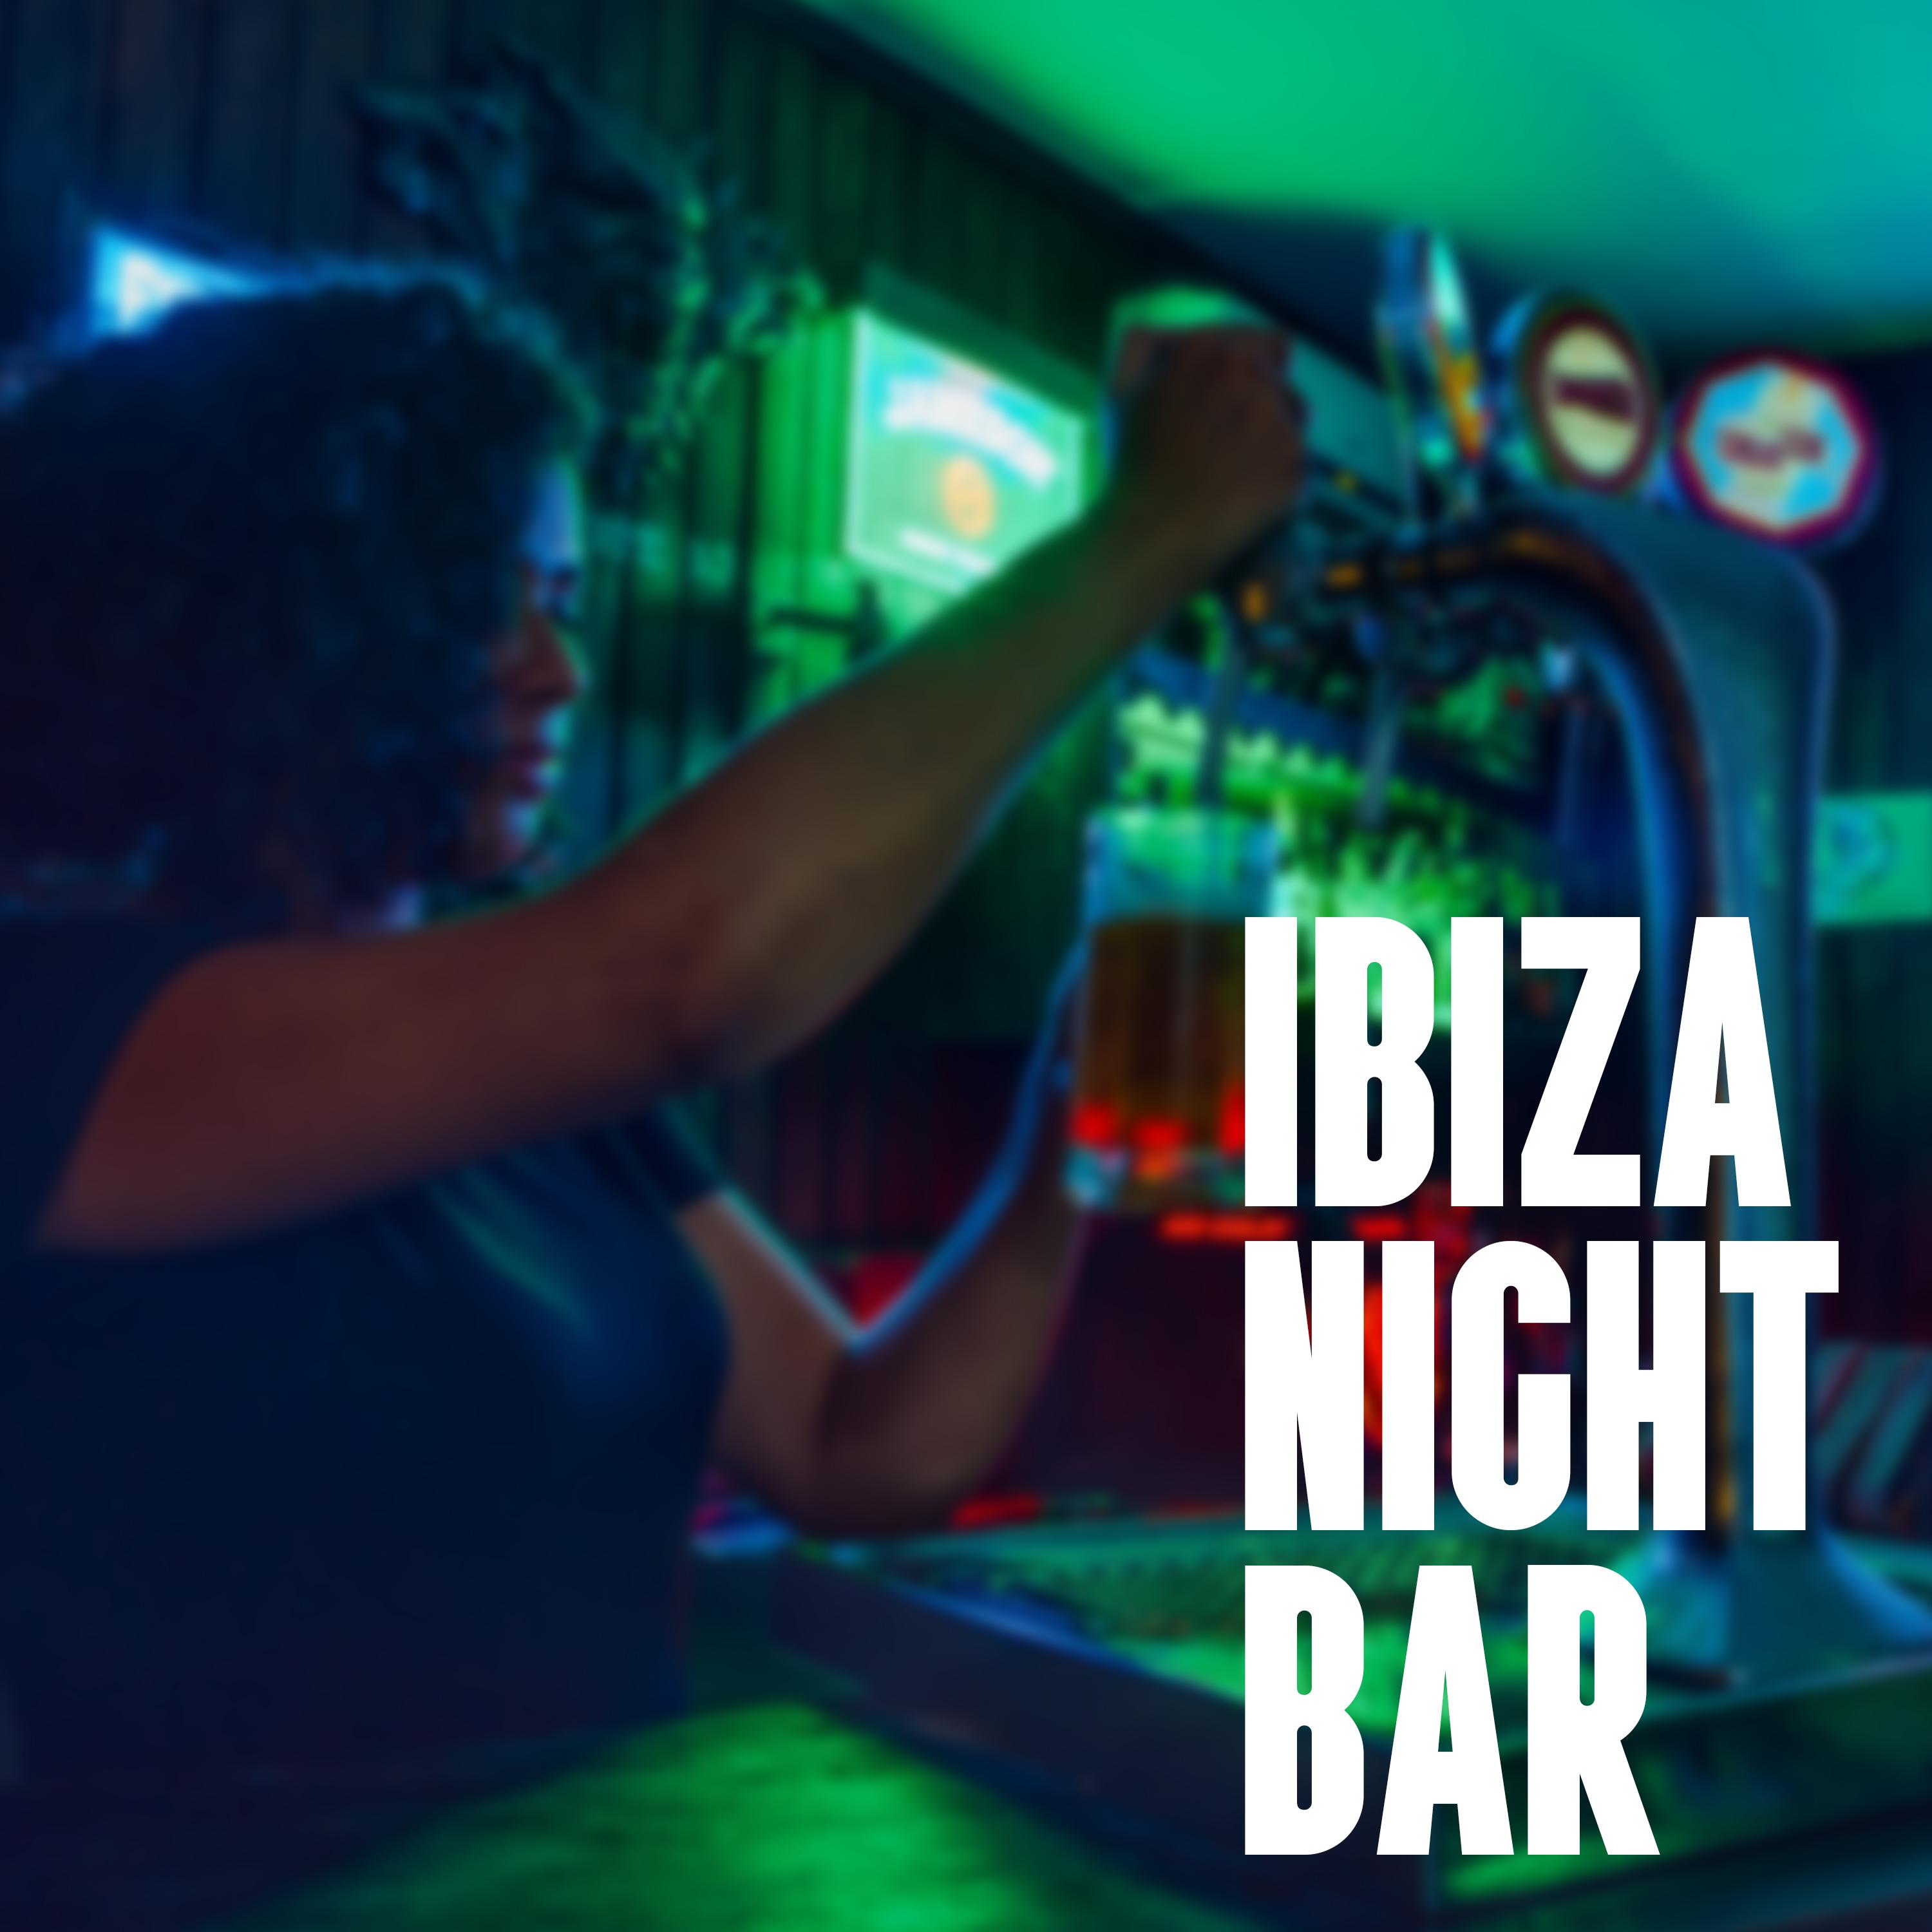 Ibiza Night Bar: Best Beachside Bar & Café Chill Out Music, Party Rhythms for Dancing and Fun Night